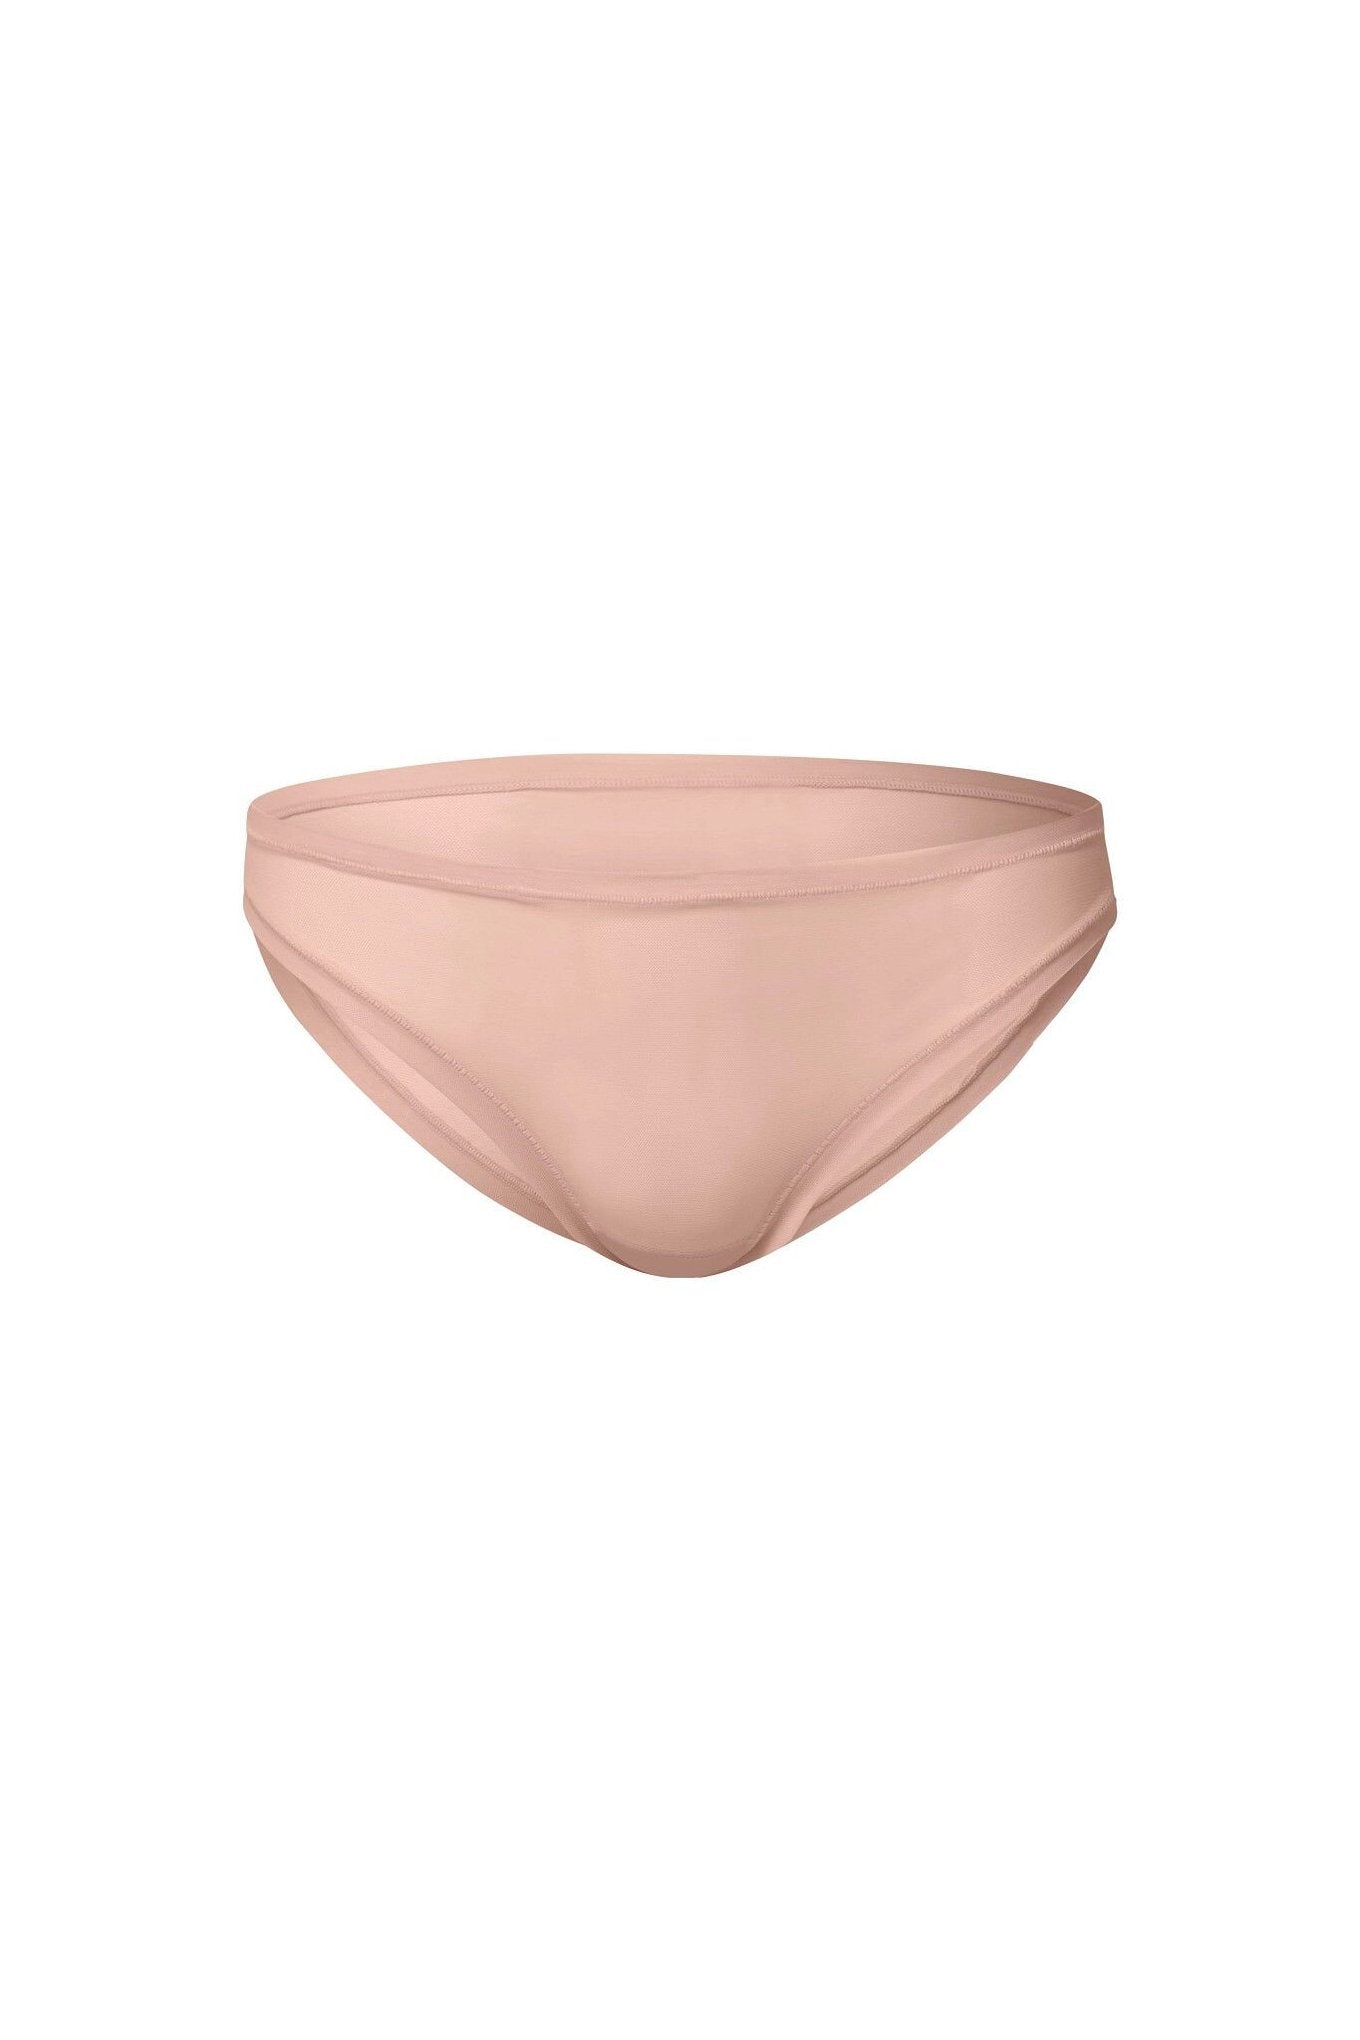 nueskin Zoe Mesh Mid-Rise Cheeky Brief in color Rose Cloud and shape midi brief